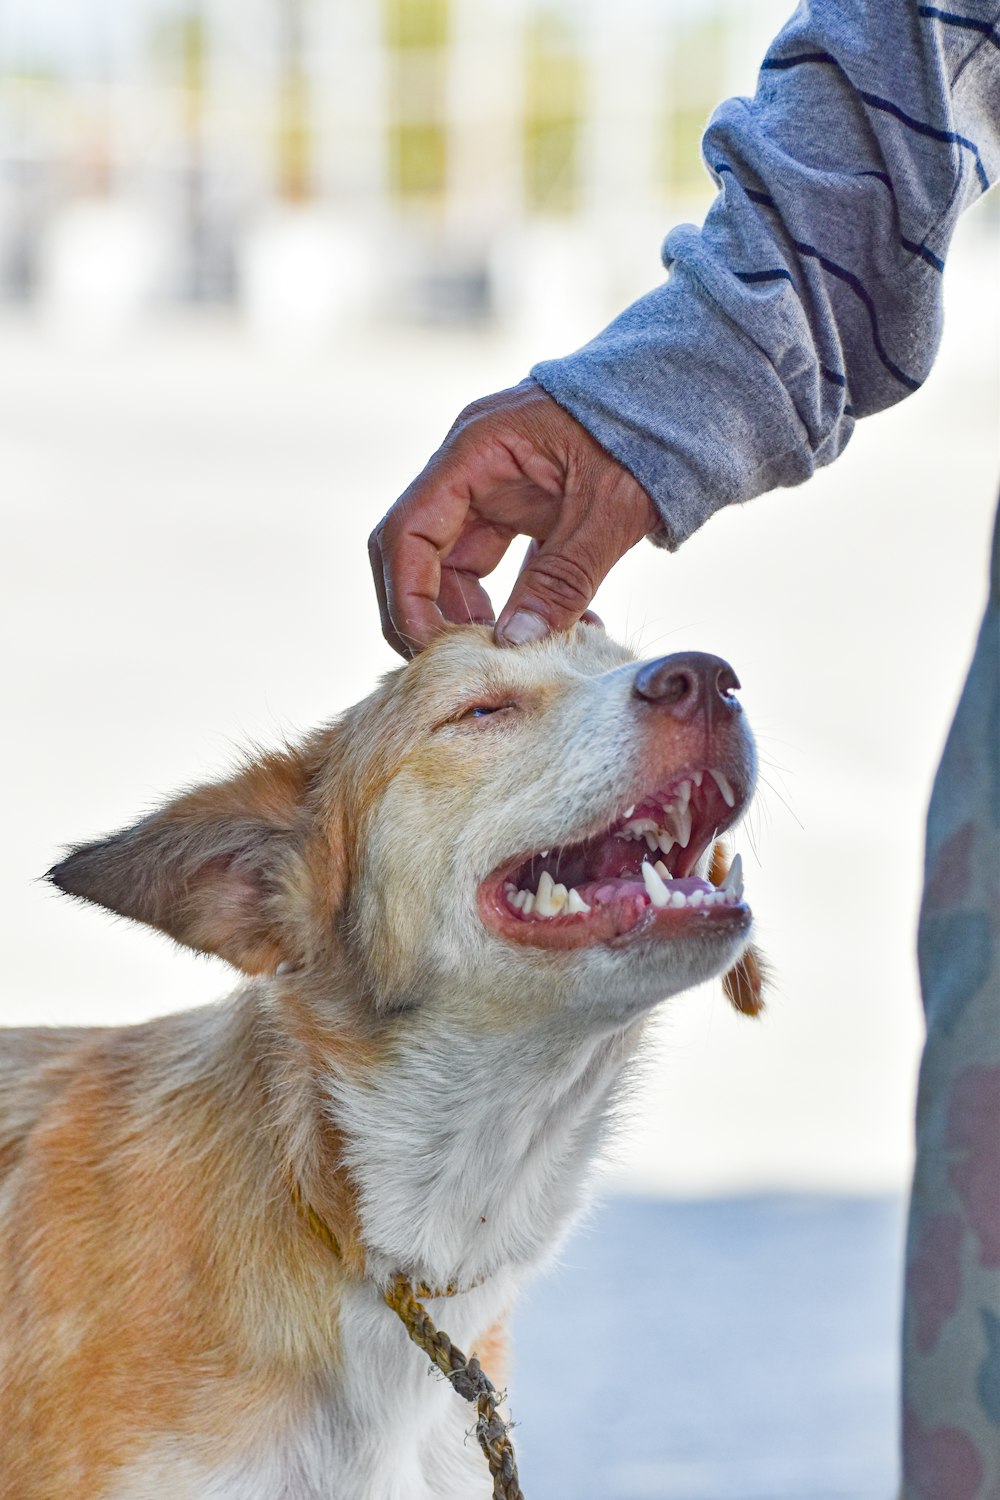 a person petting a dog with its mouth open